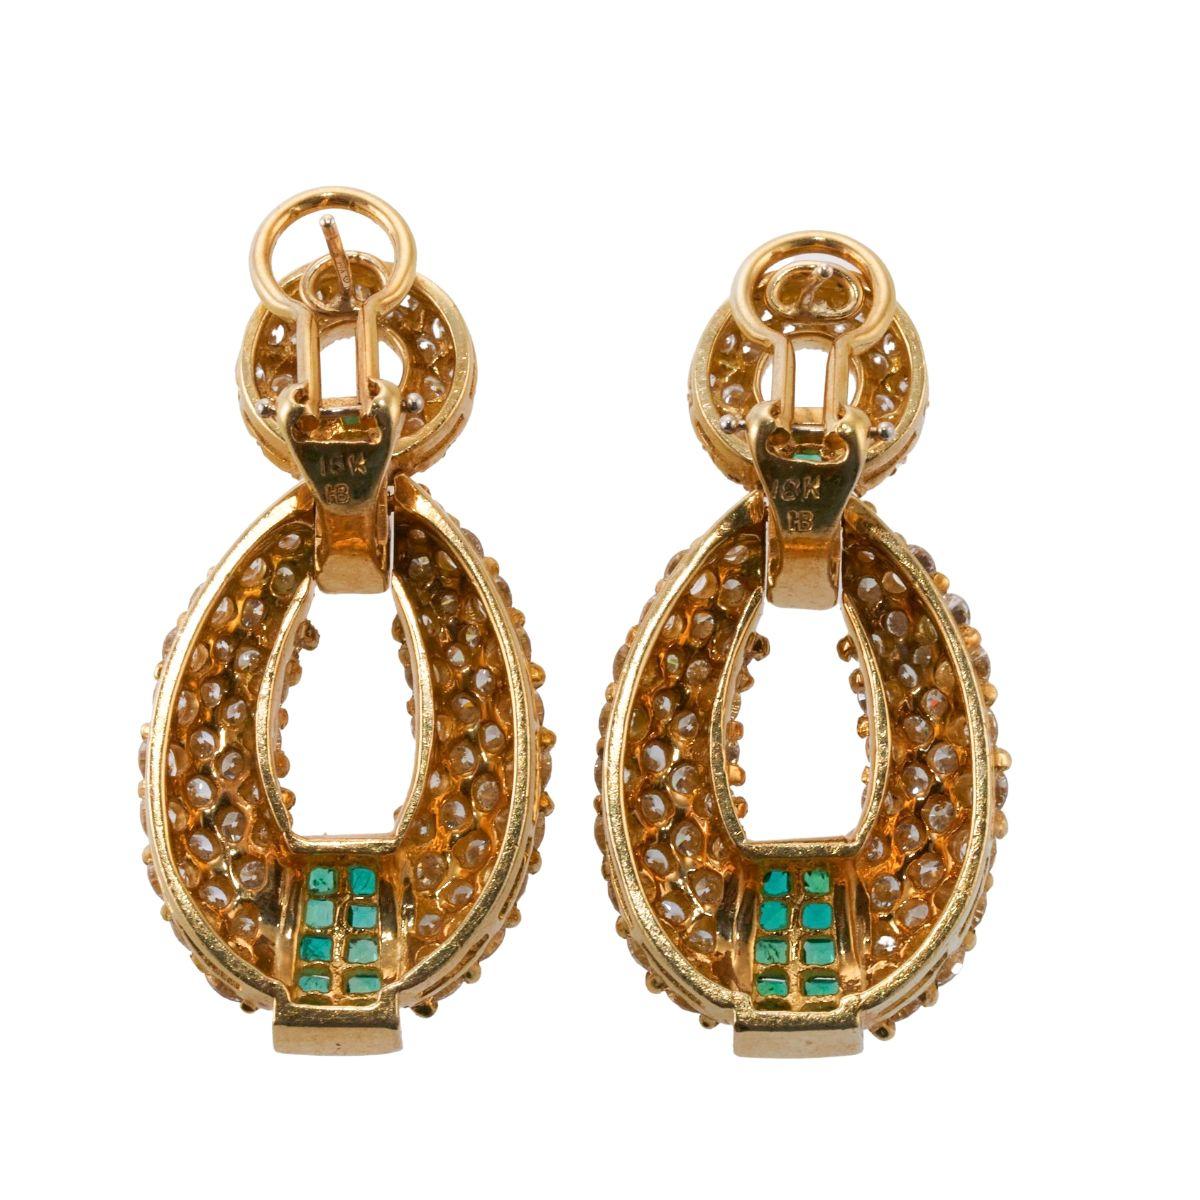 Hammerman Brothers Diamond Emerald Gold Earrings In Excellent Condition For Sale In Lambertville, NJ